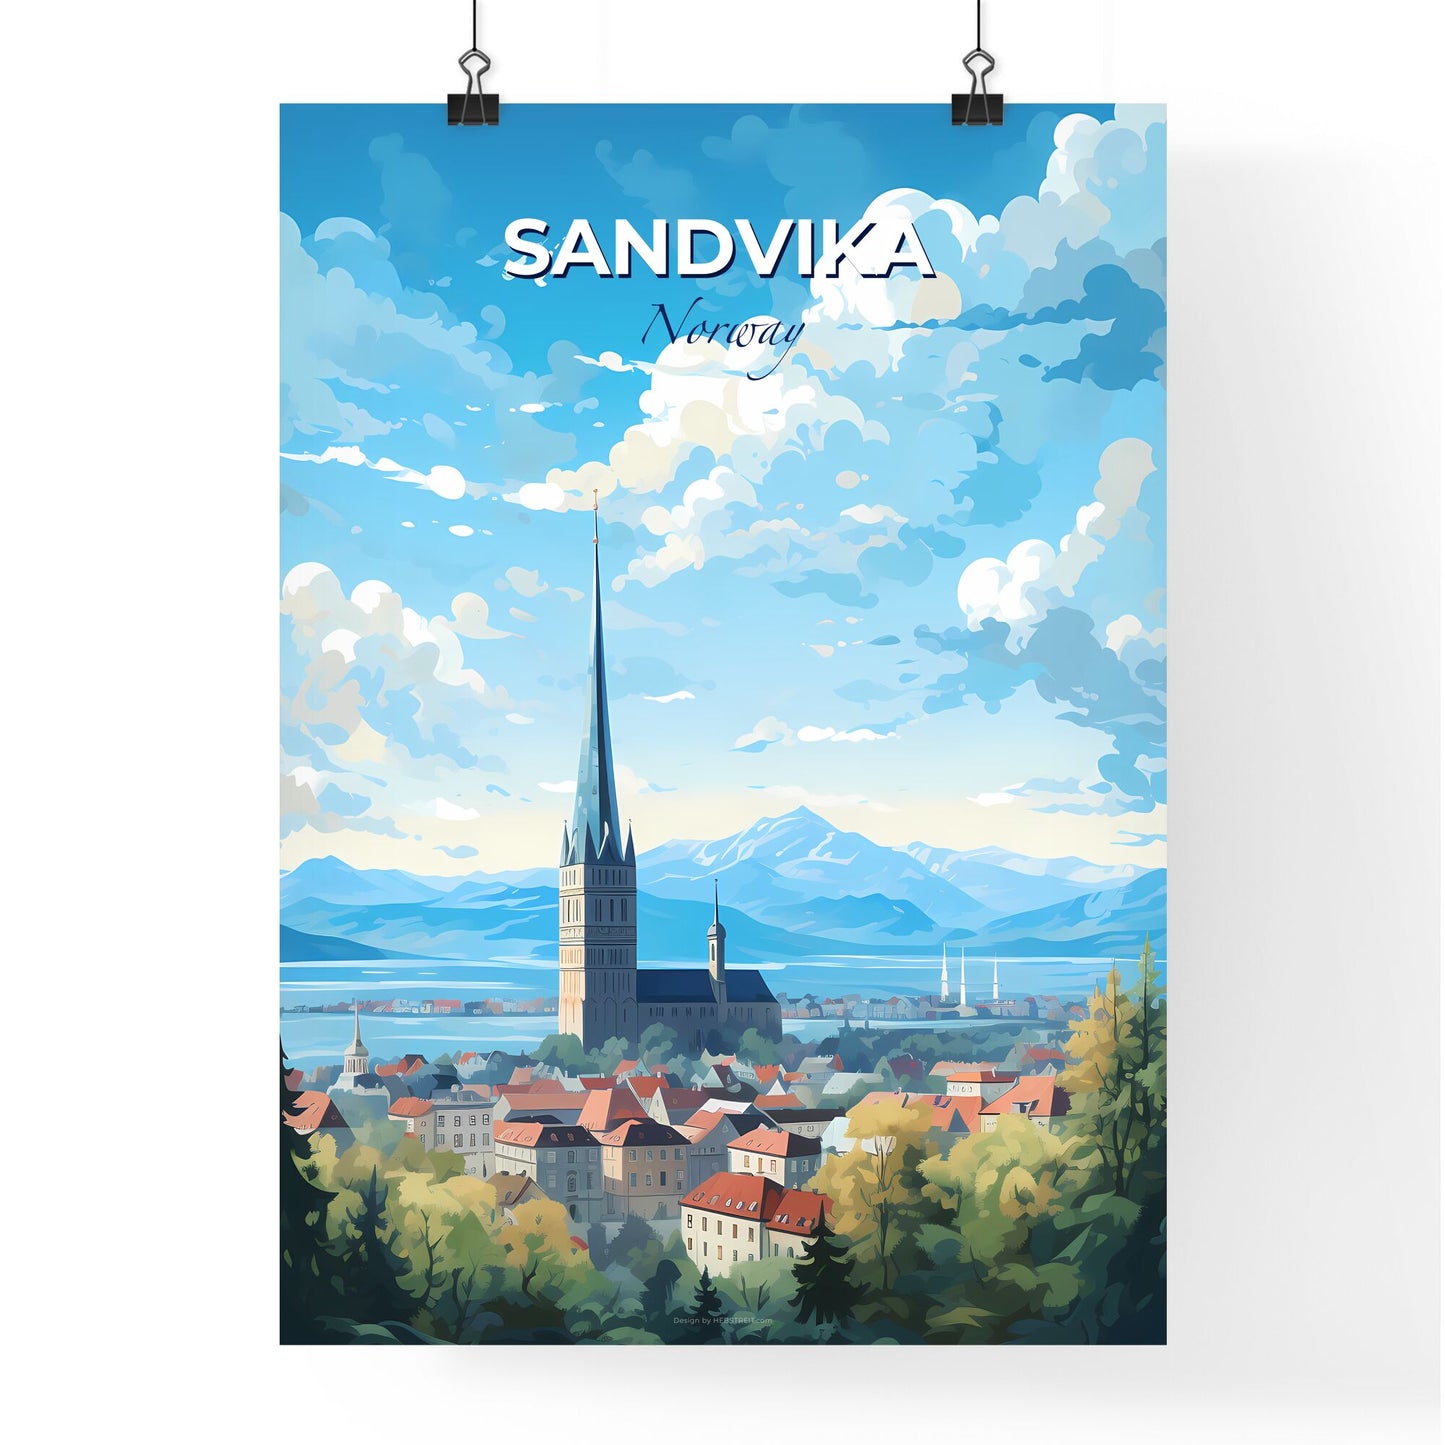 Sandvika Norway Skyline - A City With A Tall Tower And A Lake And Mountains - Customizable Travel Gift Default Title